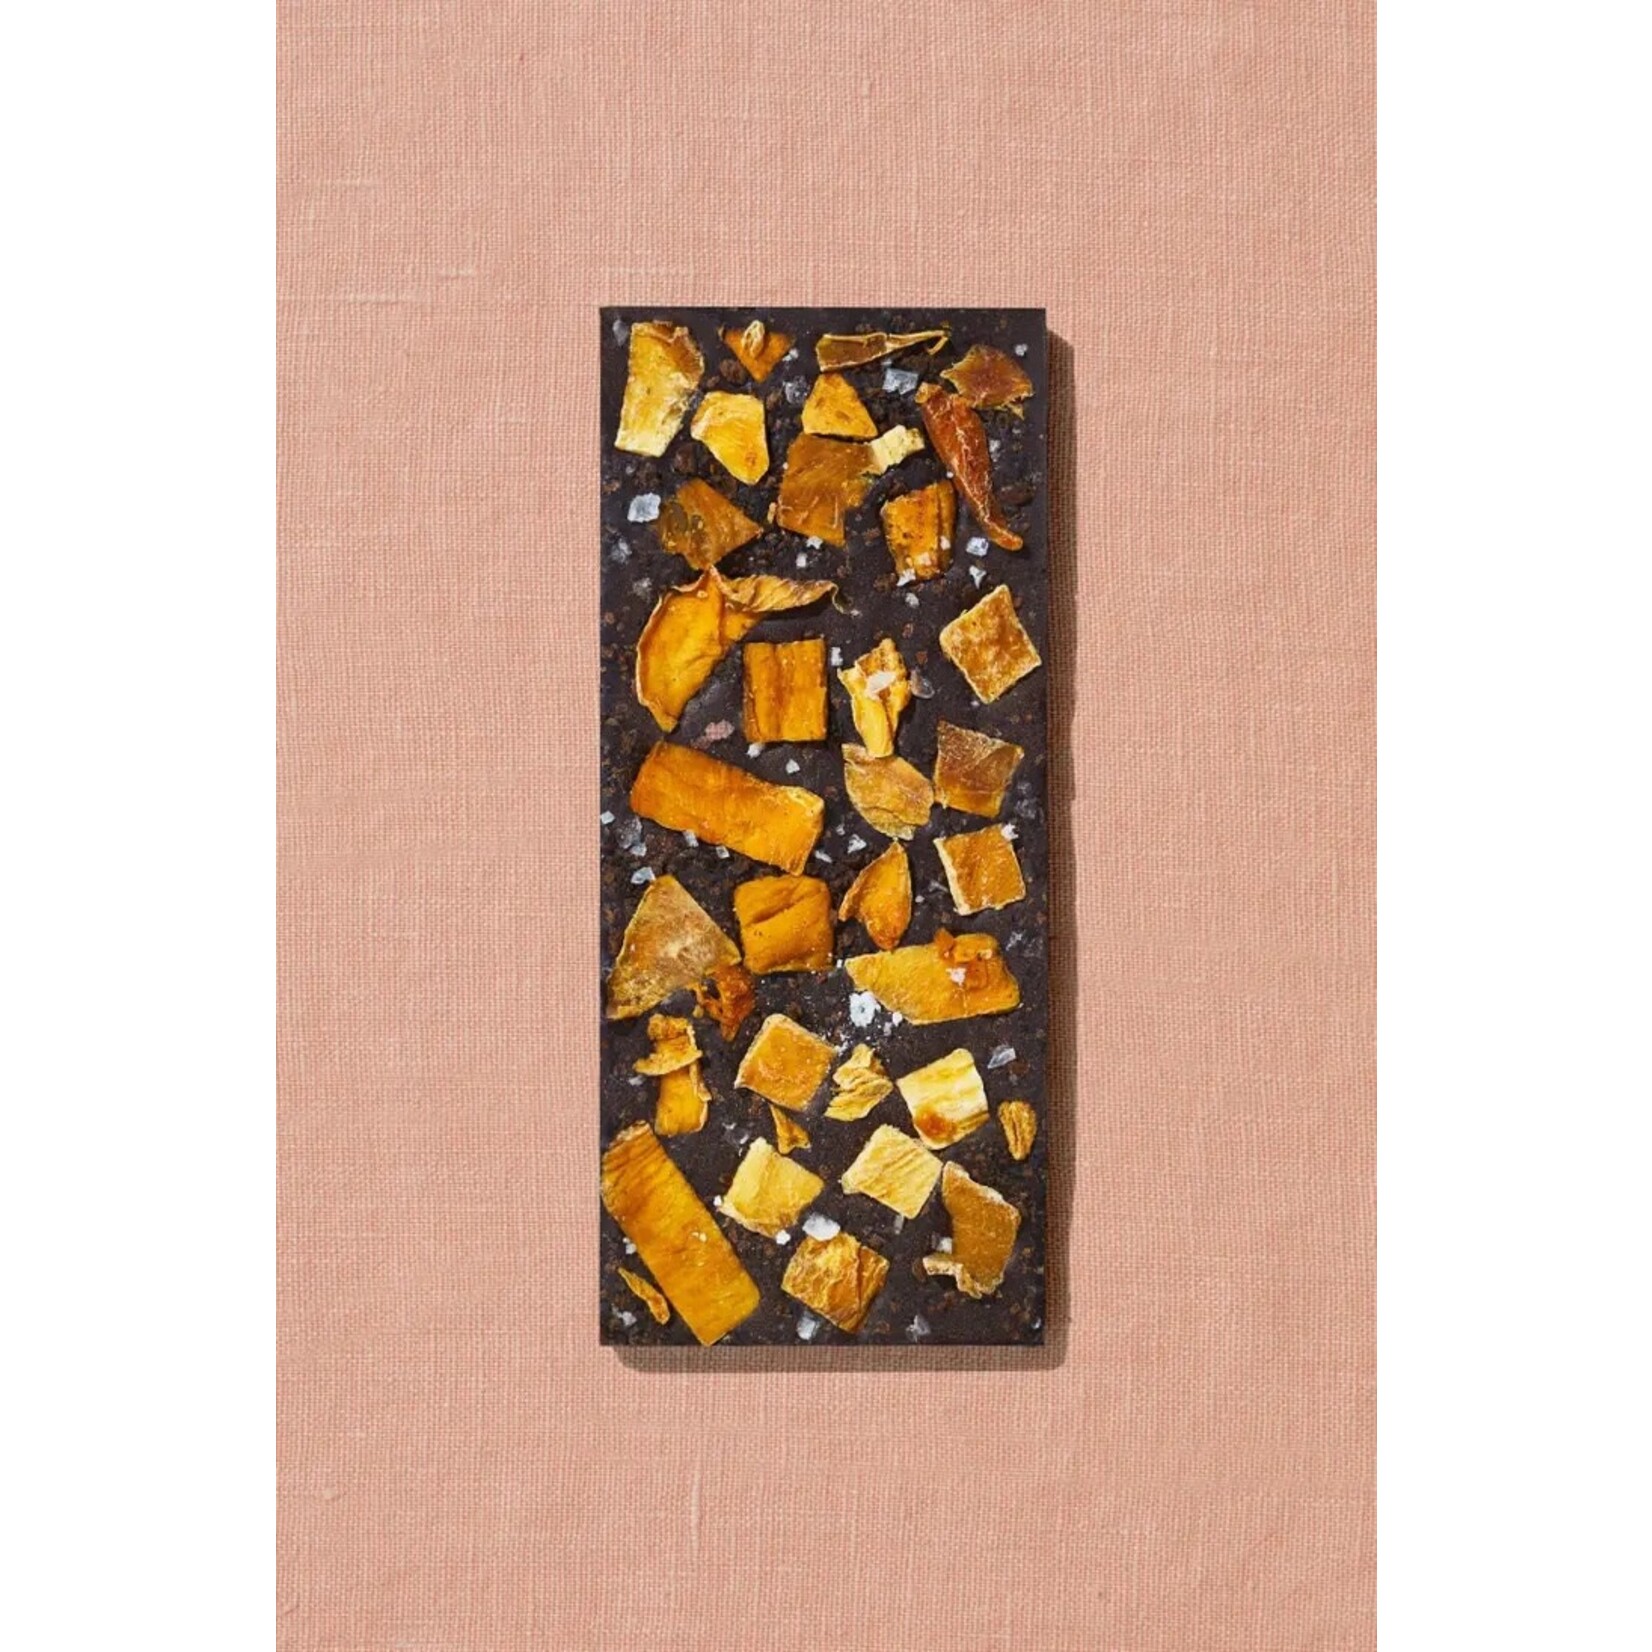 Spring + Mulberry Spring + Mulberry Date-Sweetened Chocolate Bar Mango, Urfa Chili, Black Lime